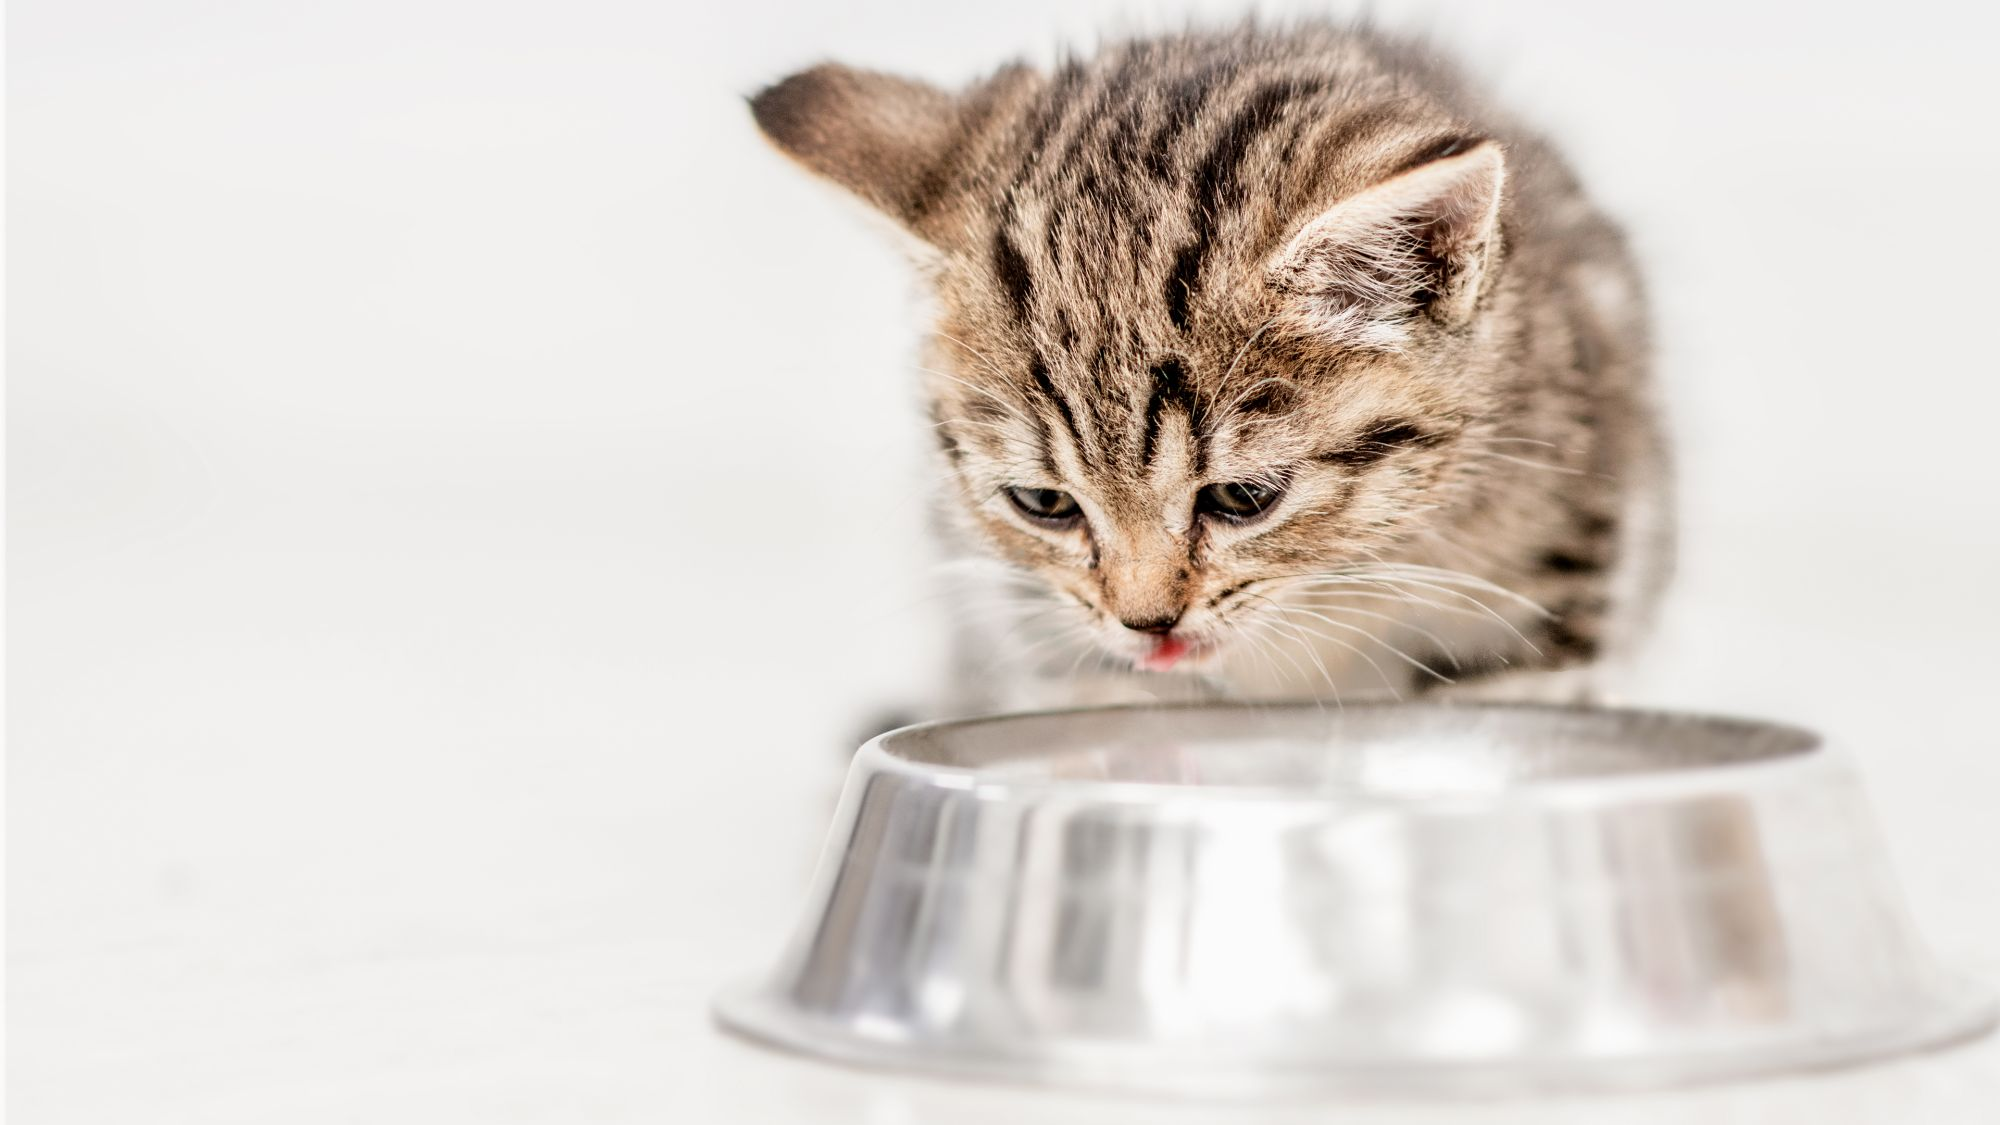 Young kitten eating out of a stainless steel feeding bowl